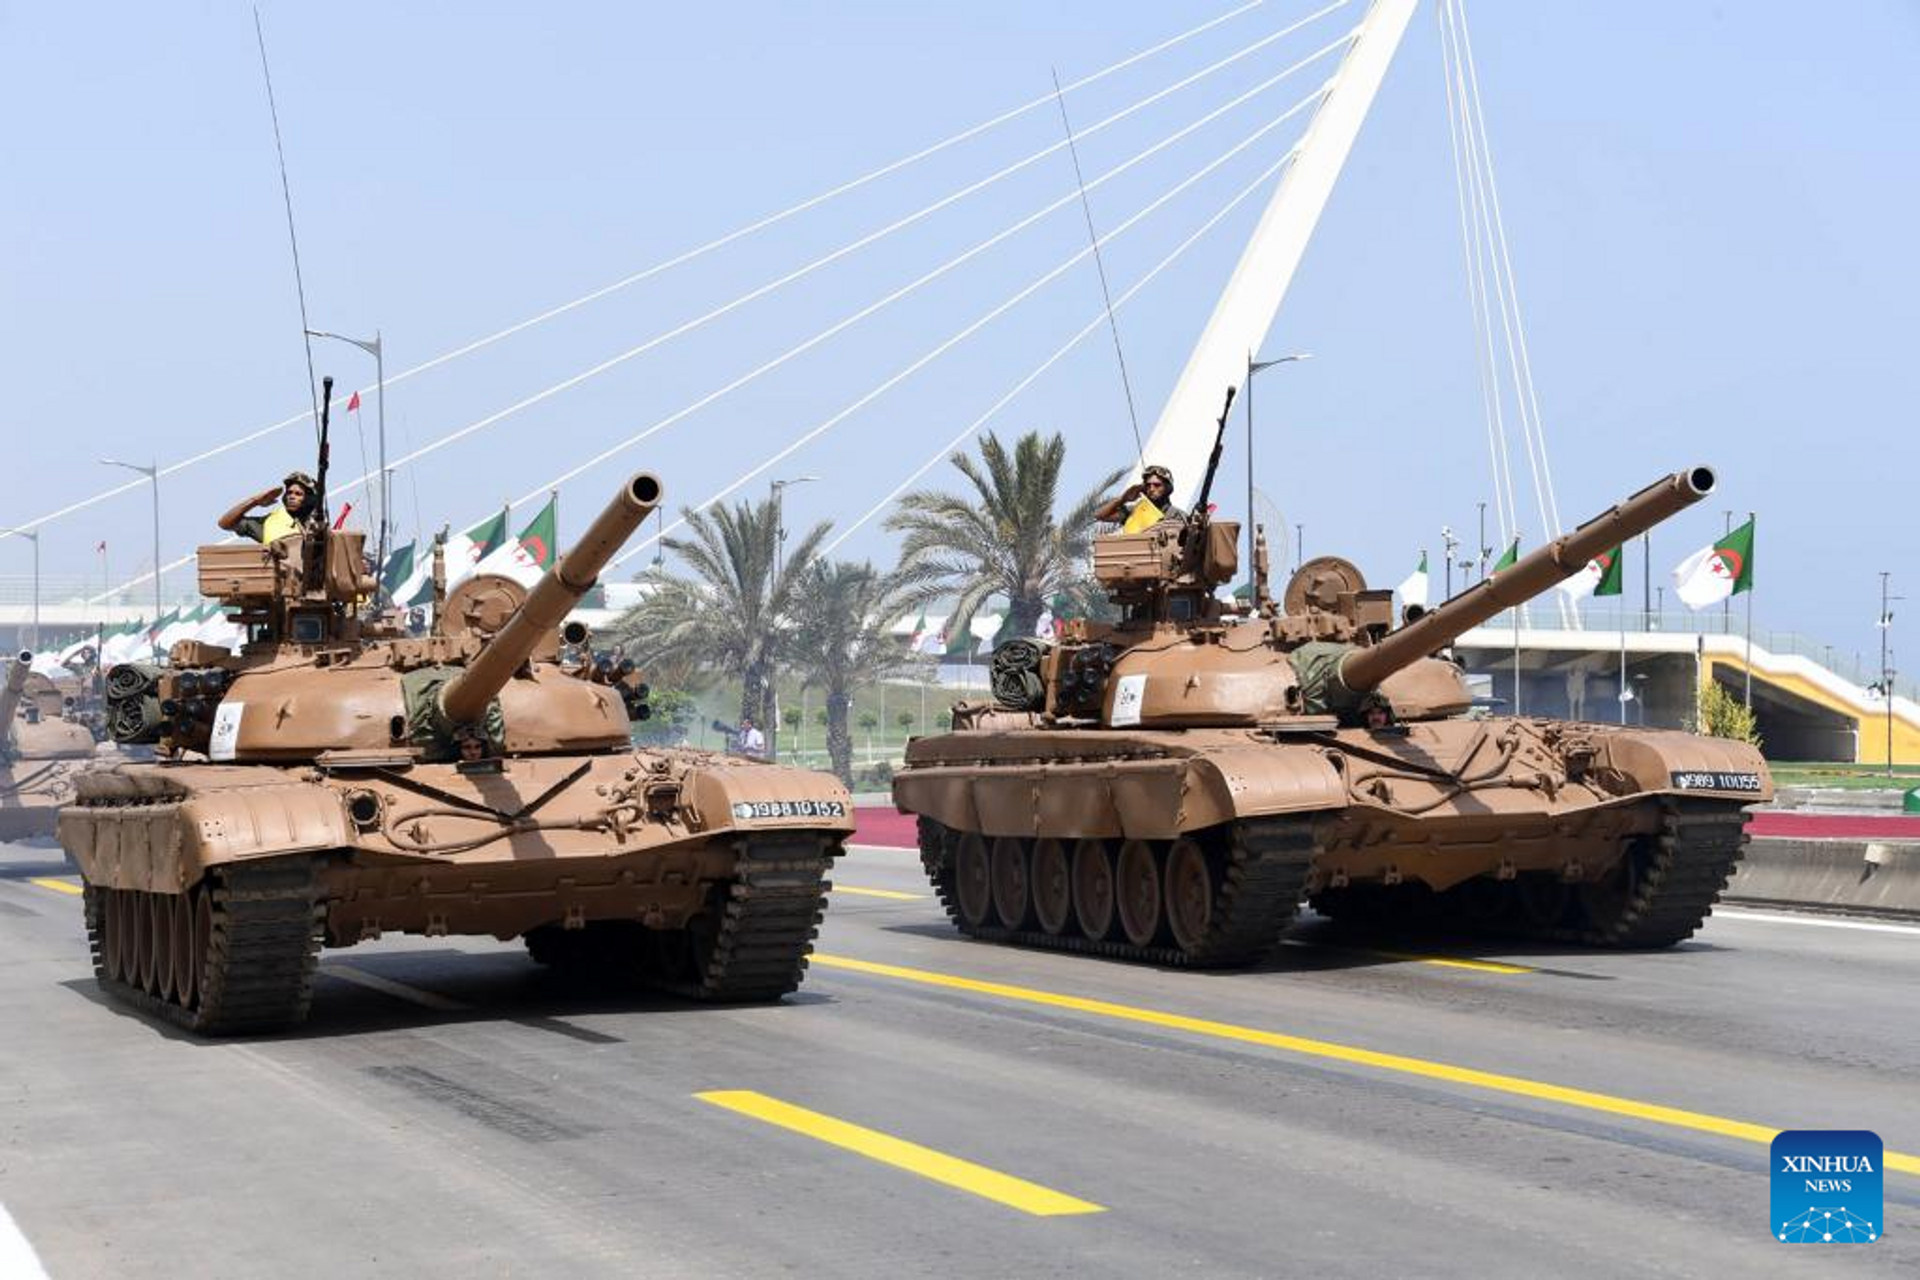 Armored vehicles are driven during a military parade to celebrate the 60th anniversary of Algeria's independence in Algiers, capital of Algeria, on July 5, 2022. Algeria on Tuesday held a grand military parade to celebrate the 60th anniversary of its independence from French colonialism, with the attendance of senior local and foreign officials. - Sputnik International, 1920, 06.07.2022